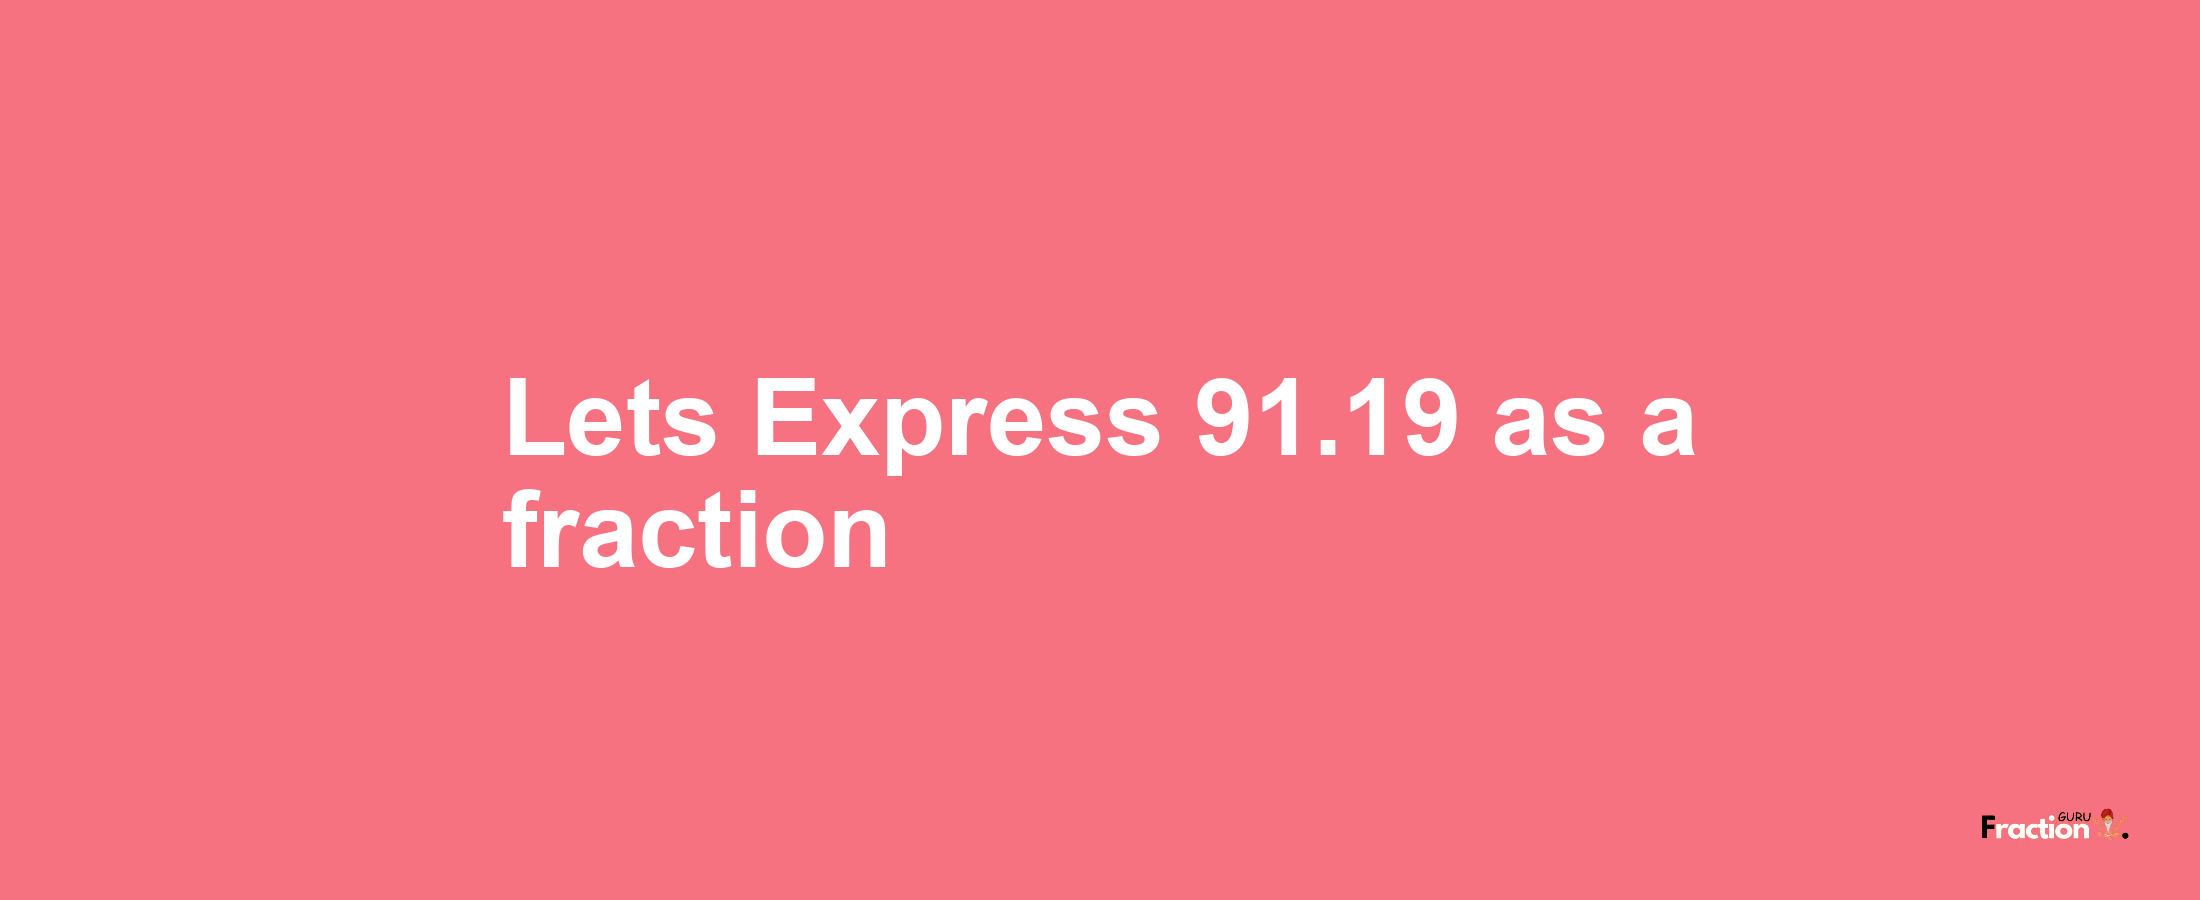 Lets Express 91.19 as afraction